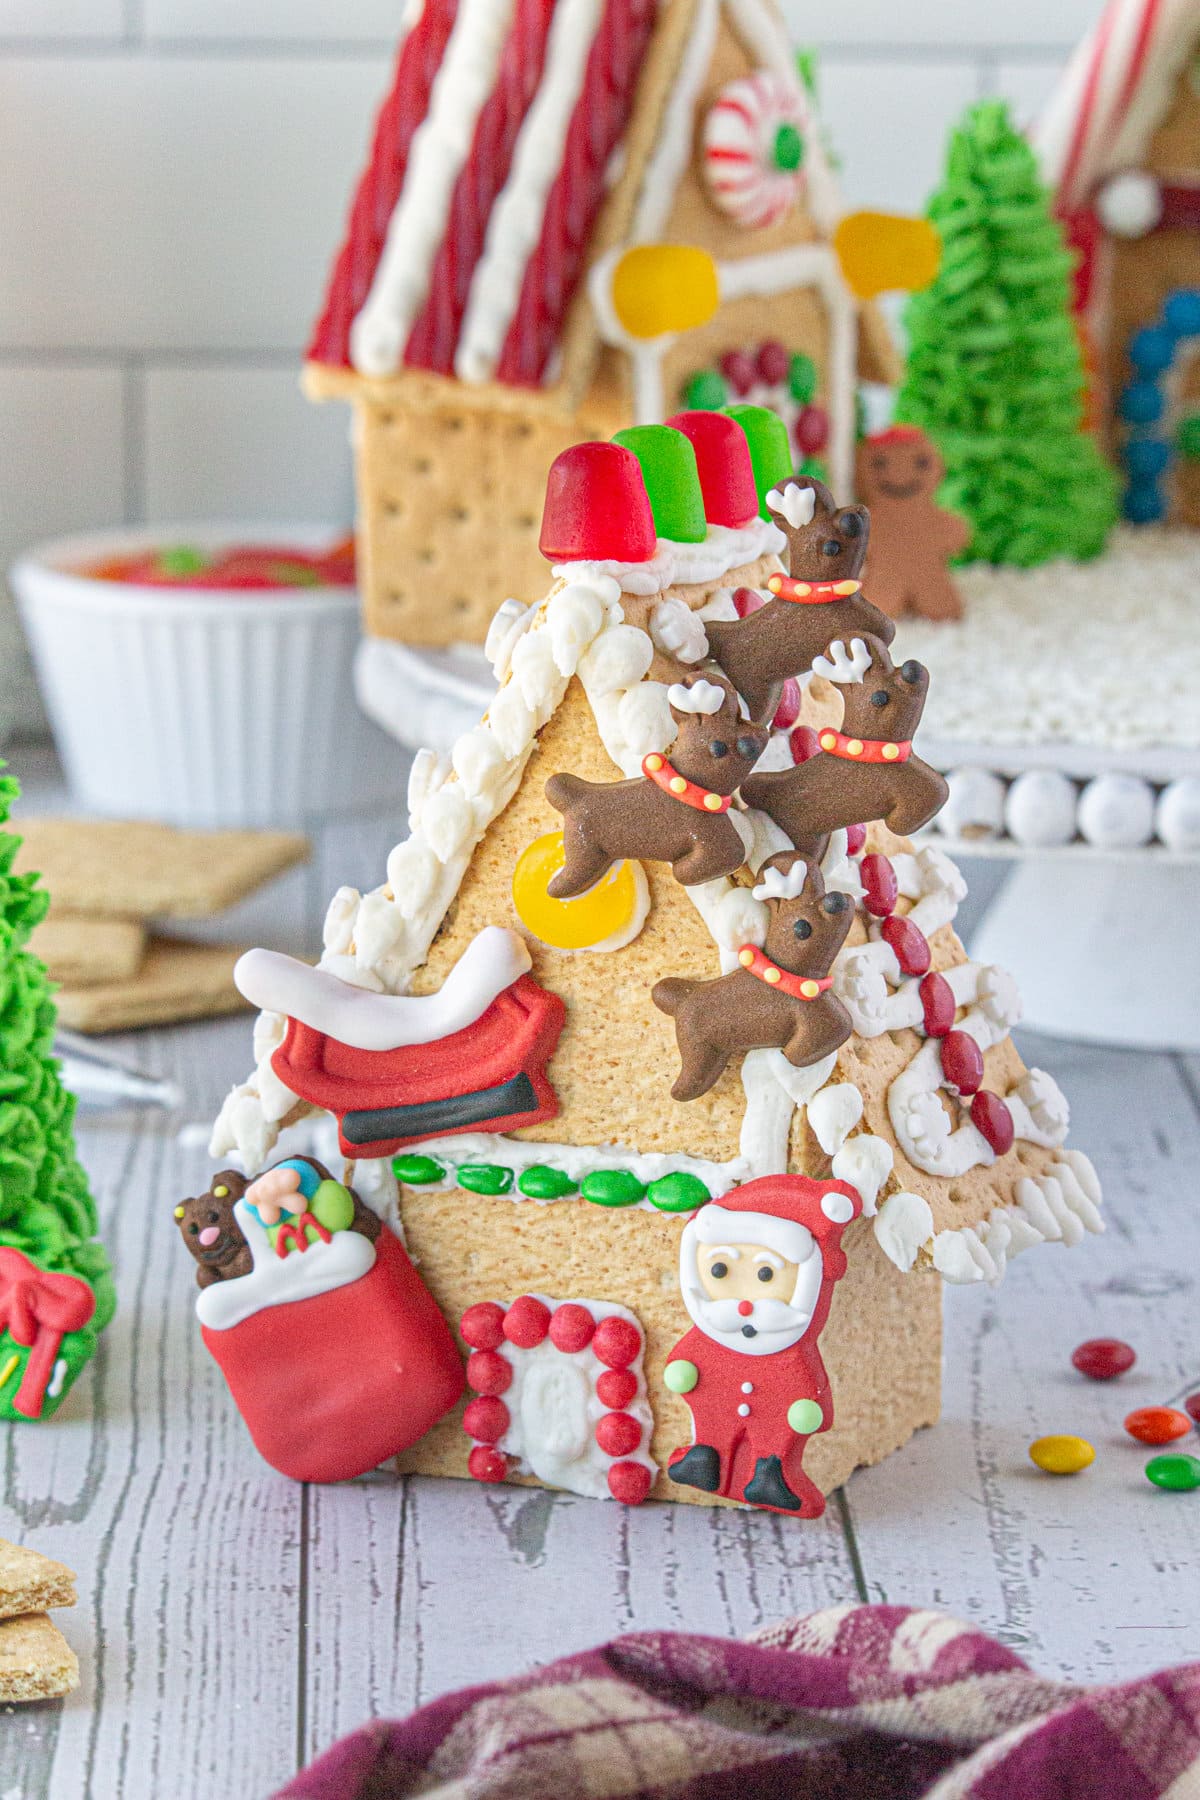 A finished gingerbread house showing a Santa